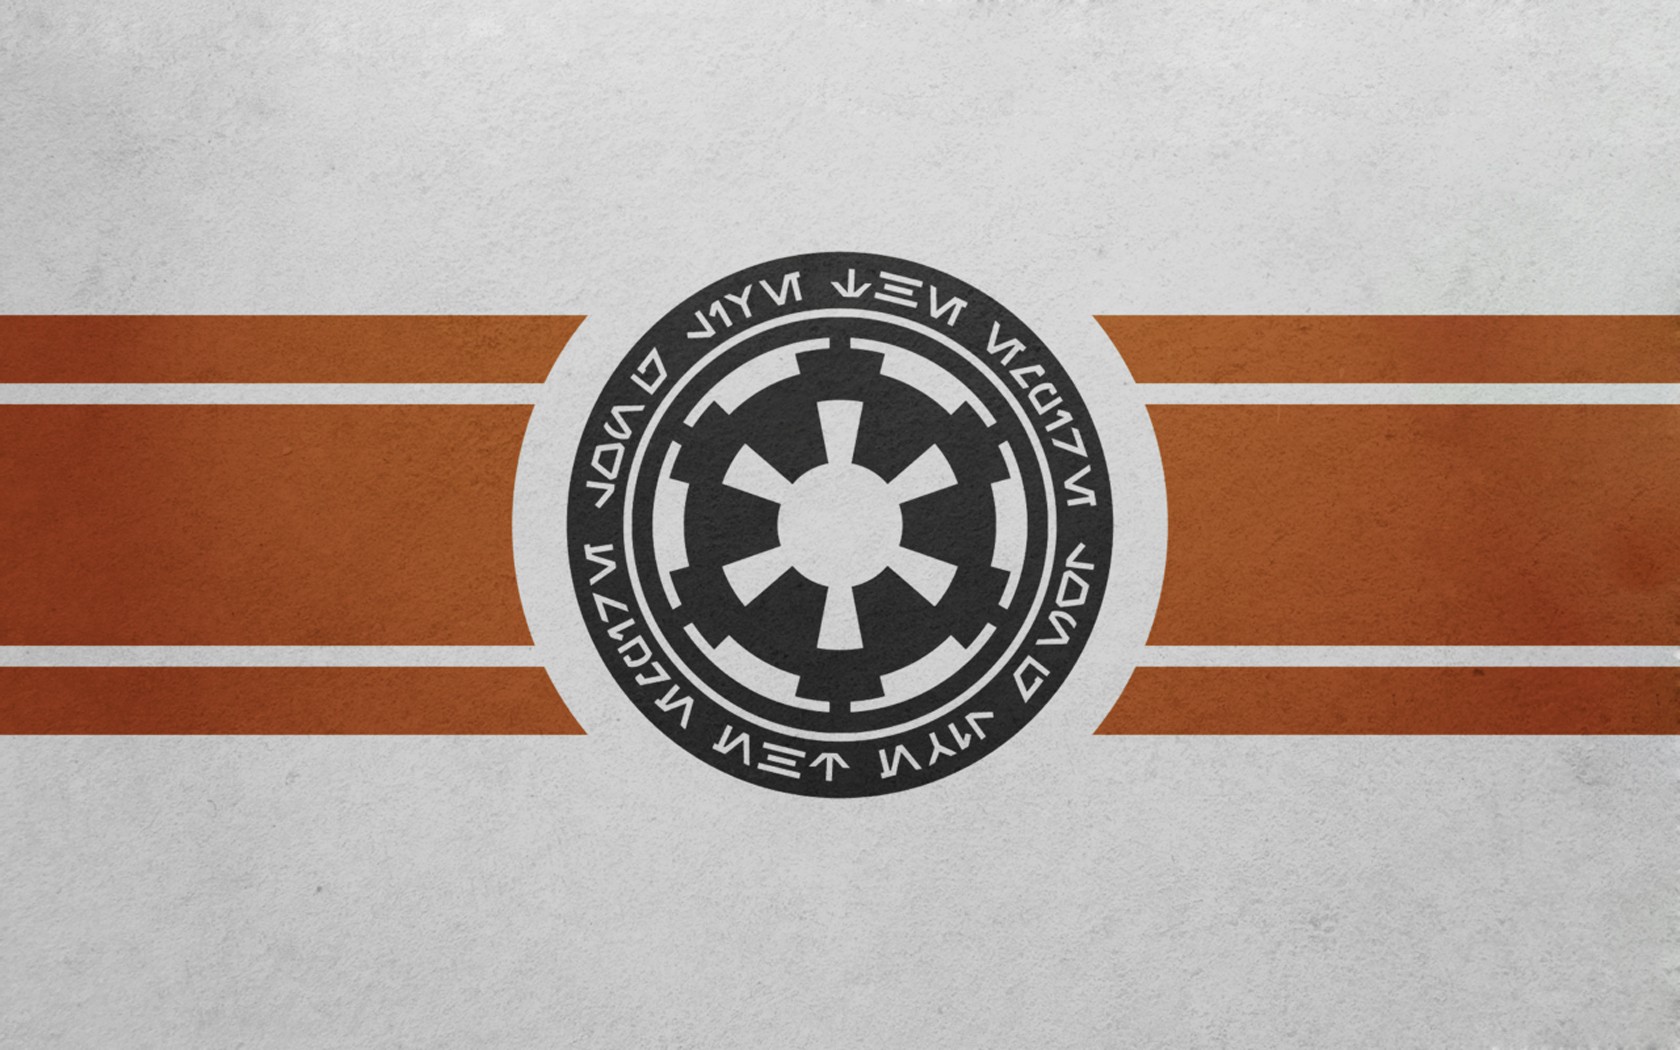 General 1680x1050 Star Wars Galactic Empire logo science fiction